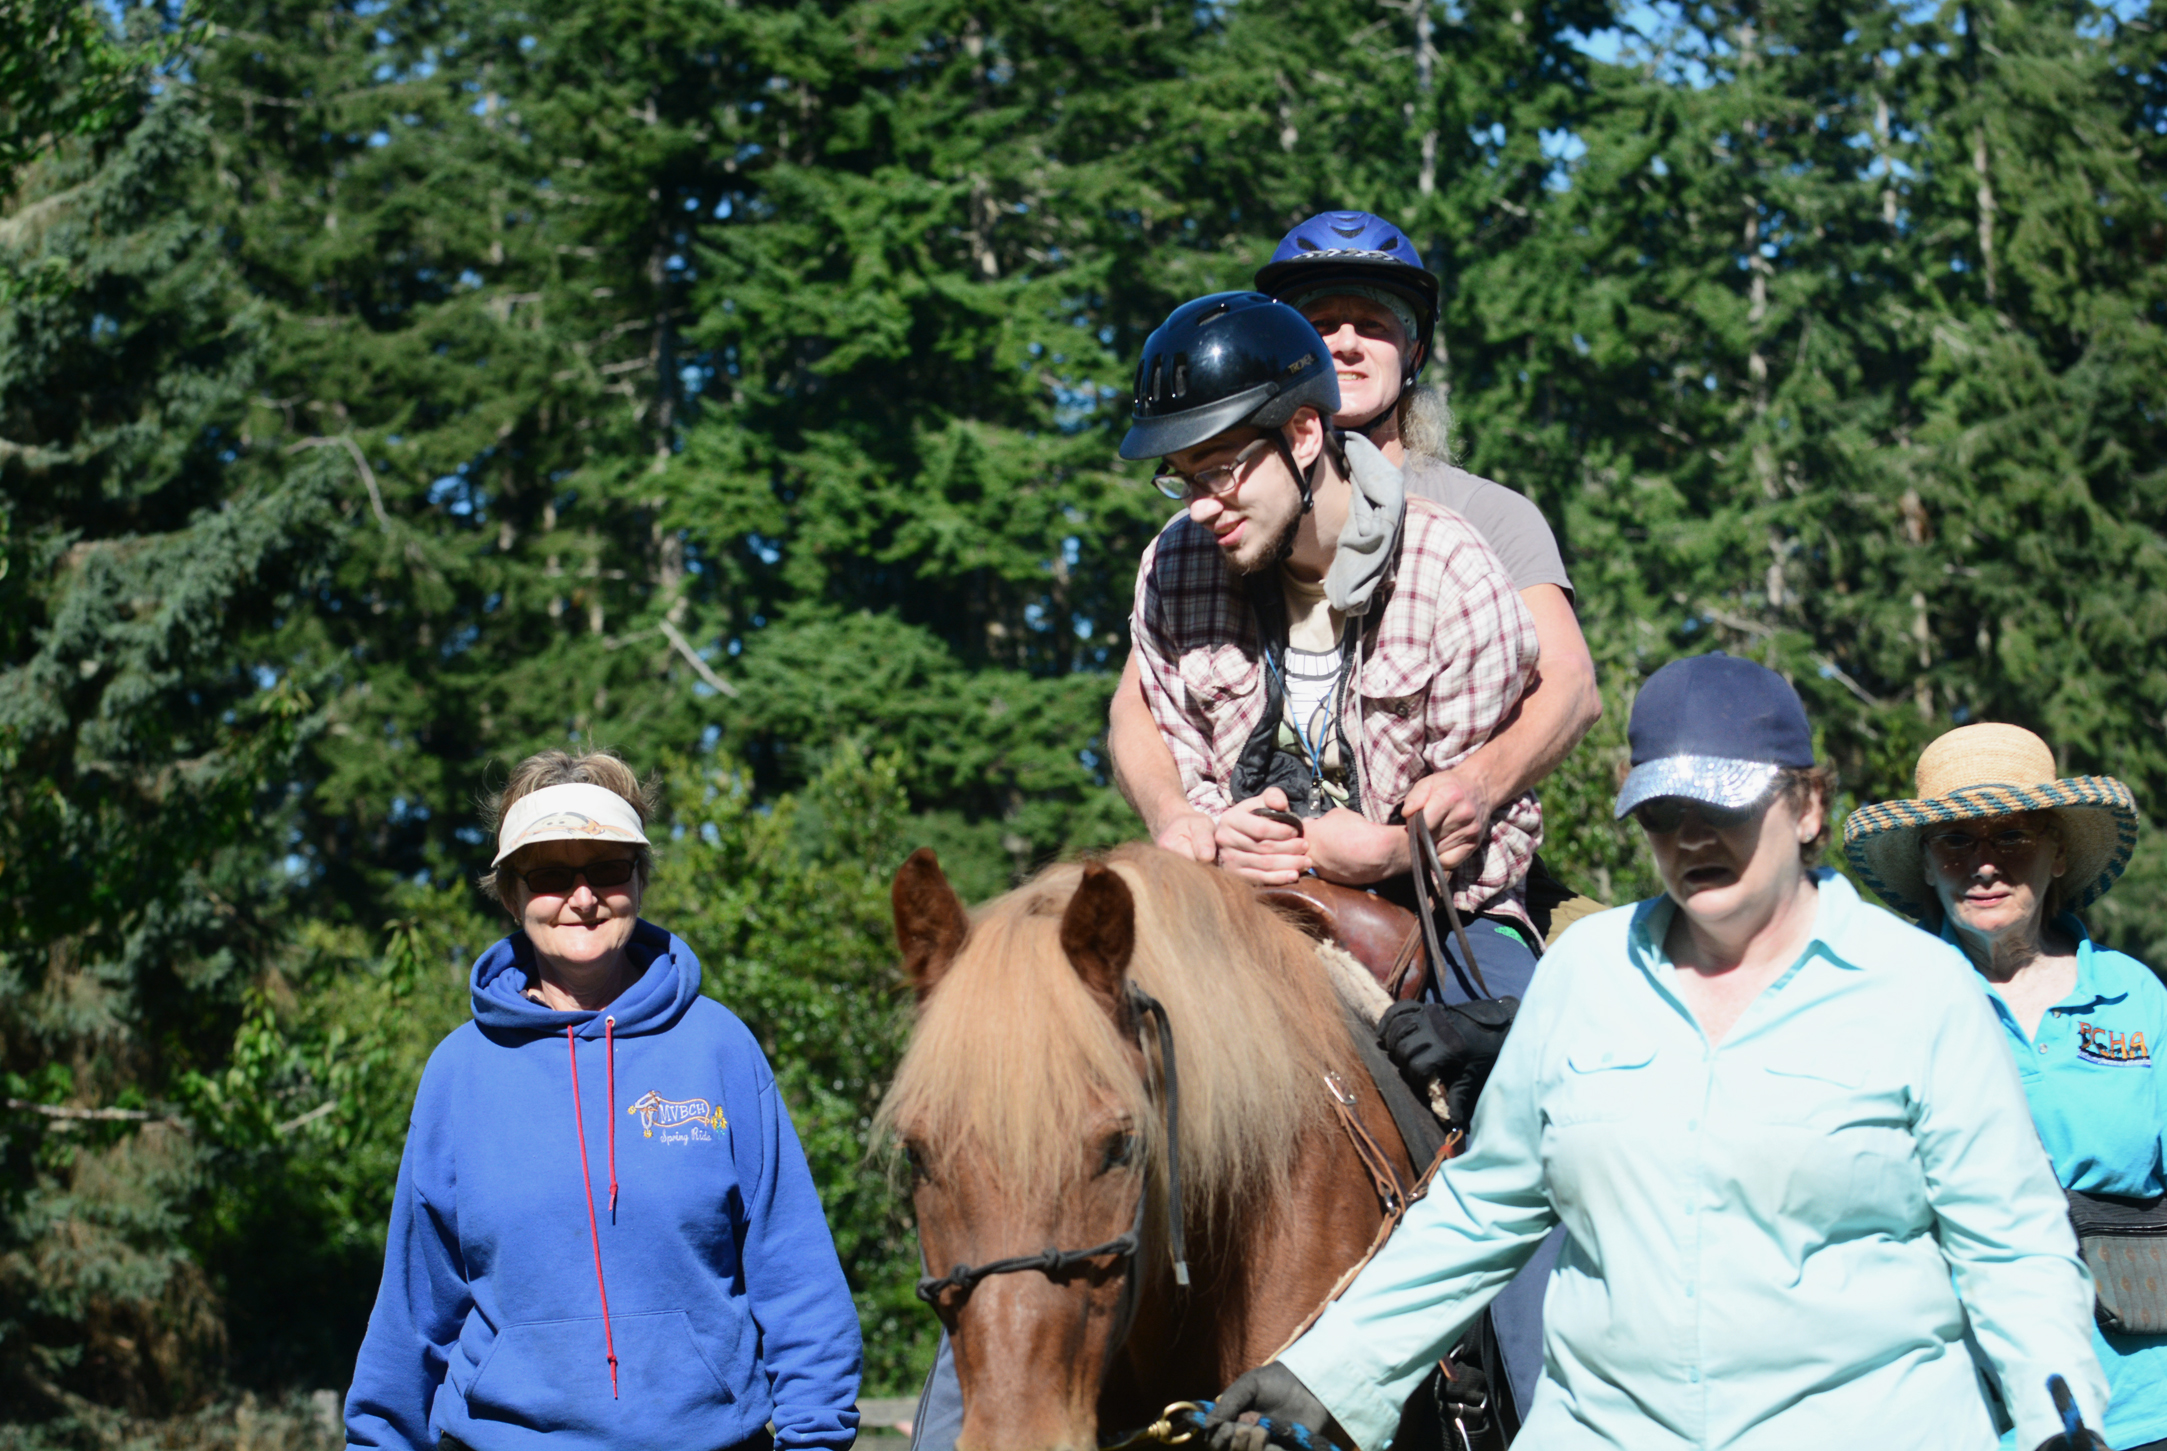 Camp Beausite NW camper Higgins Moore rides a horse last week outside Chimacum. (Jesse Major/Peninsula Daily News)